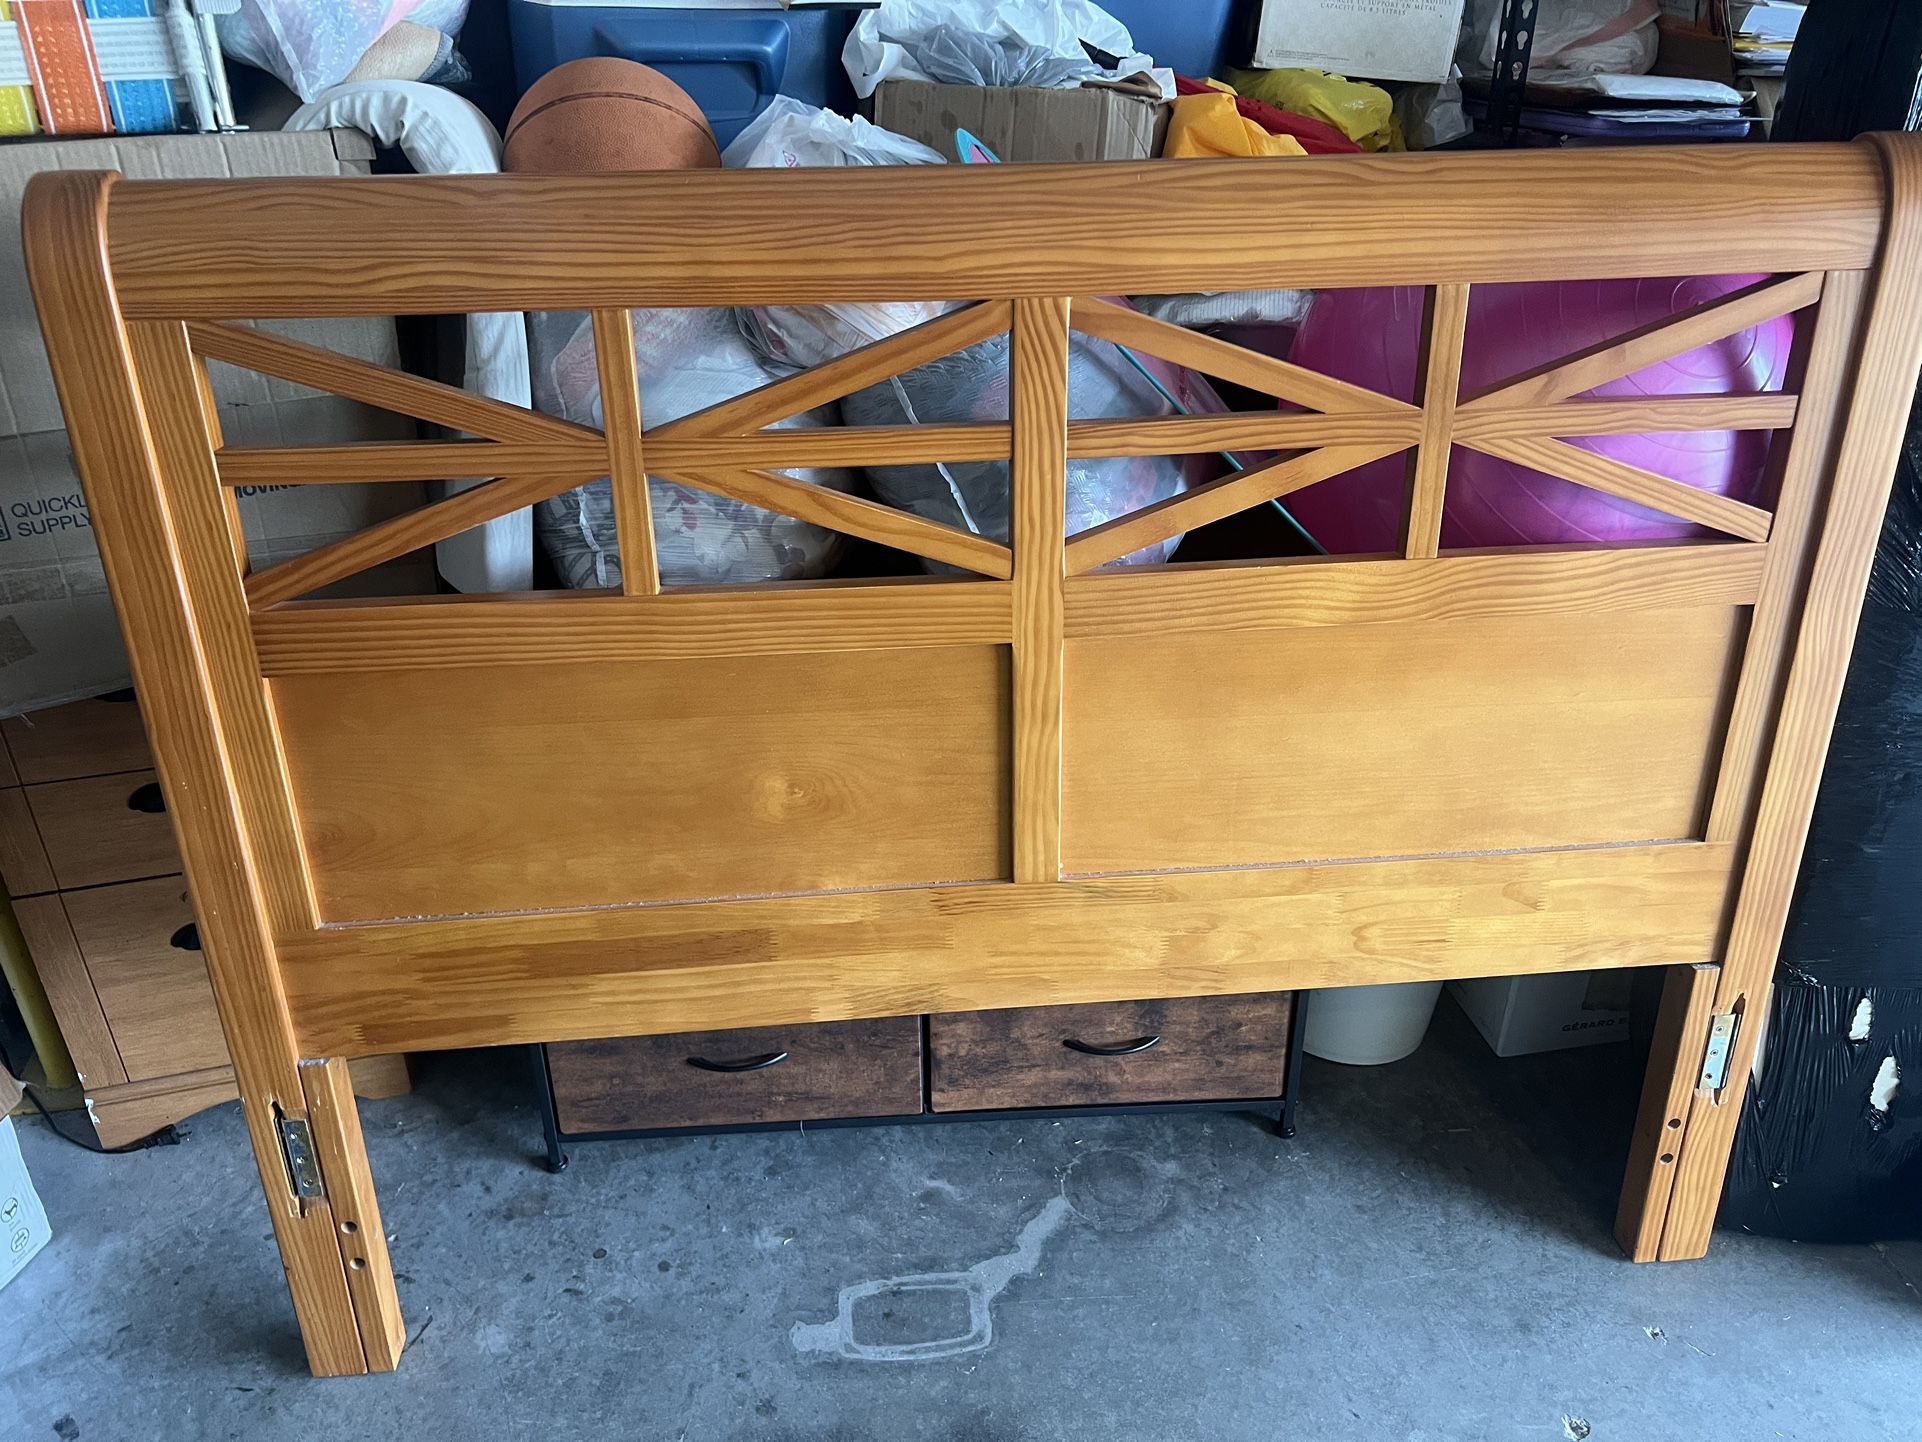 Queen Bed frame With Mattress And Box Spring 